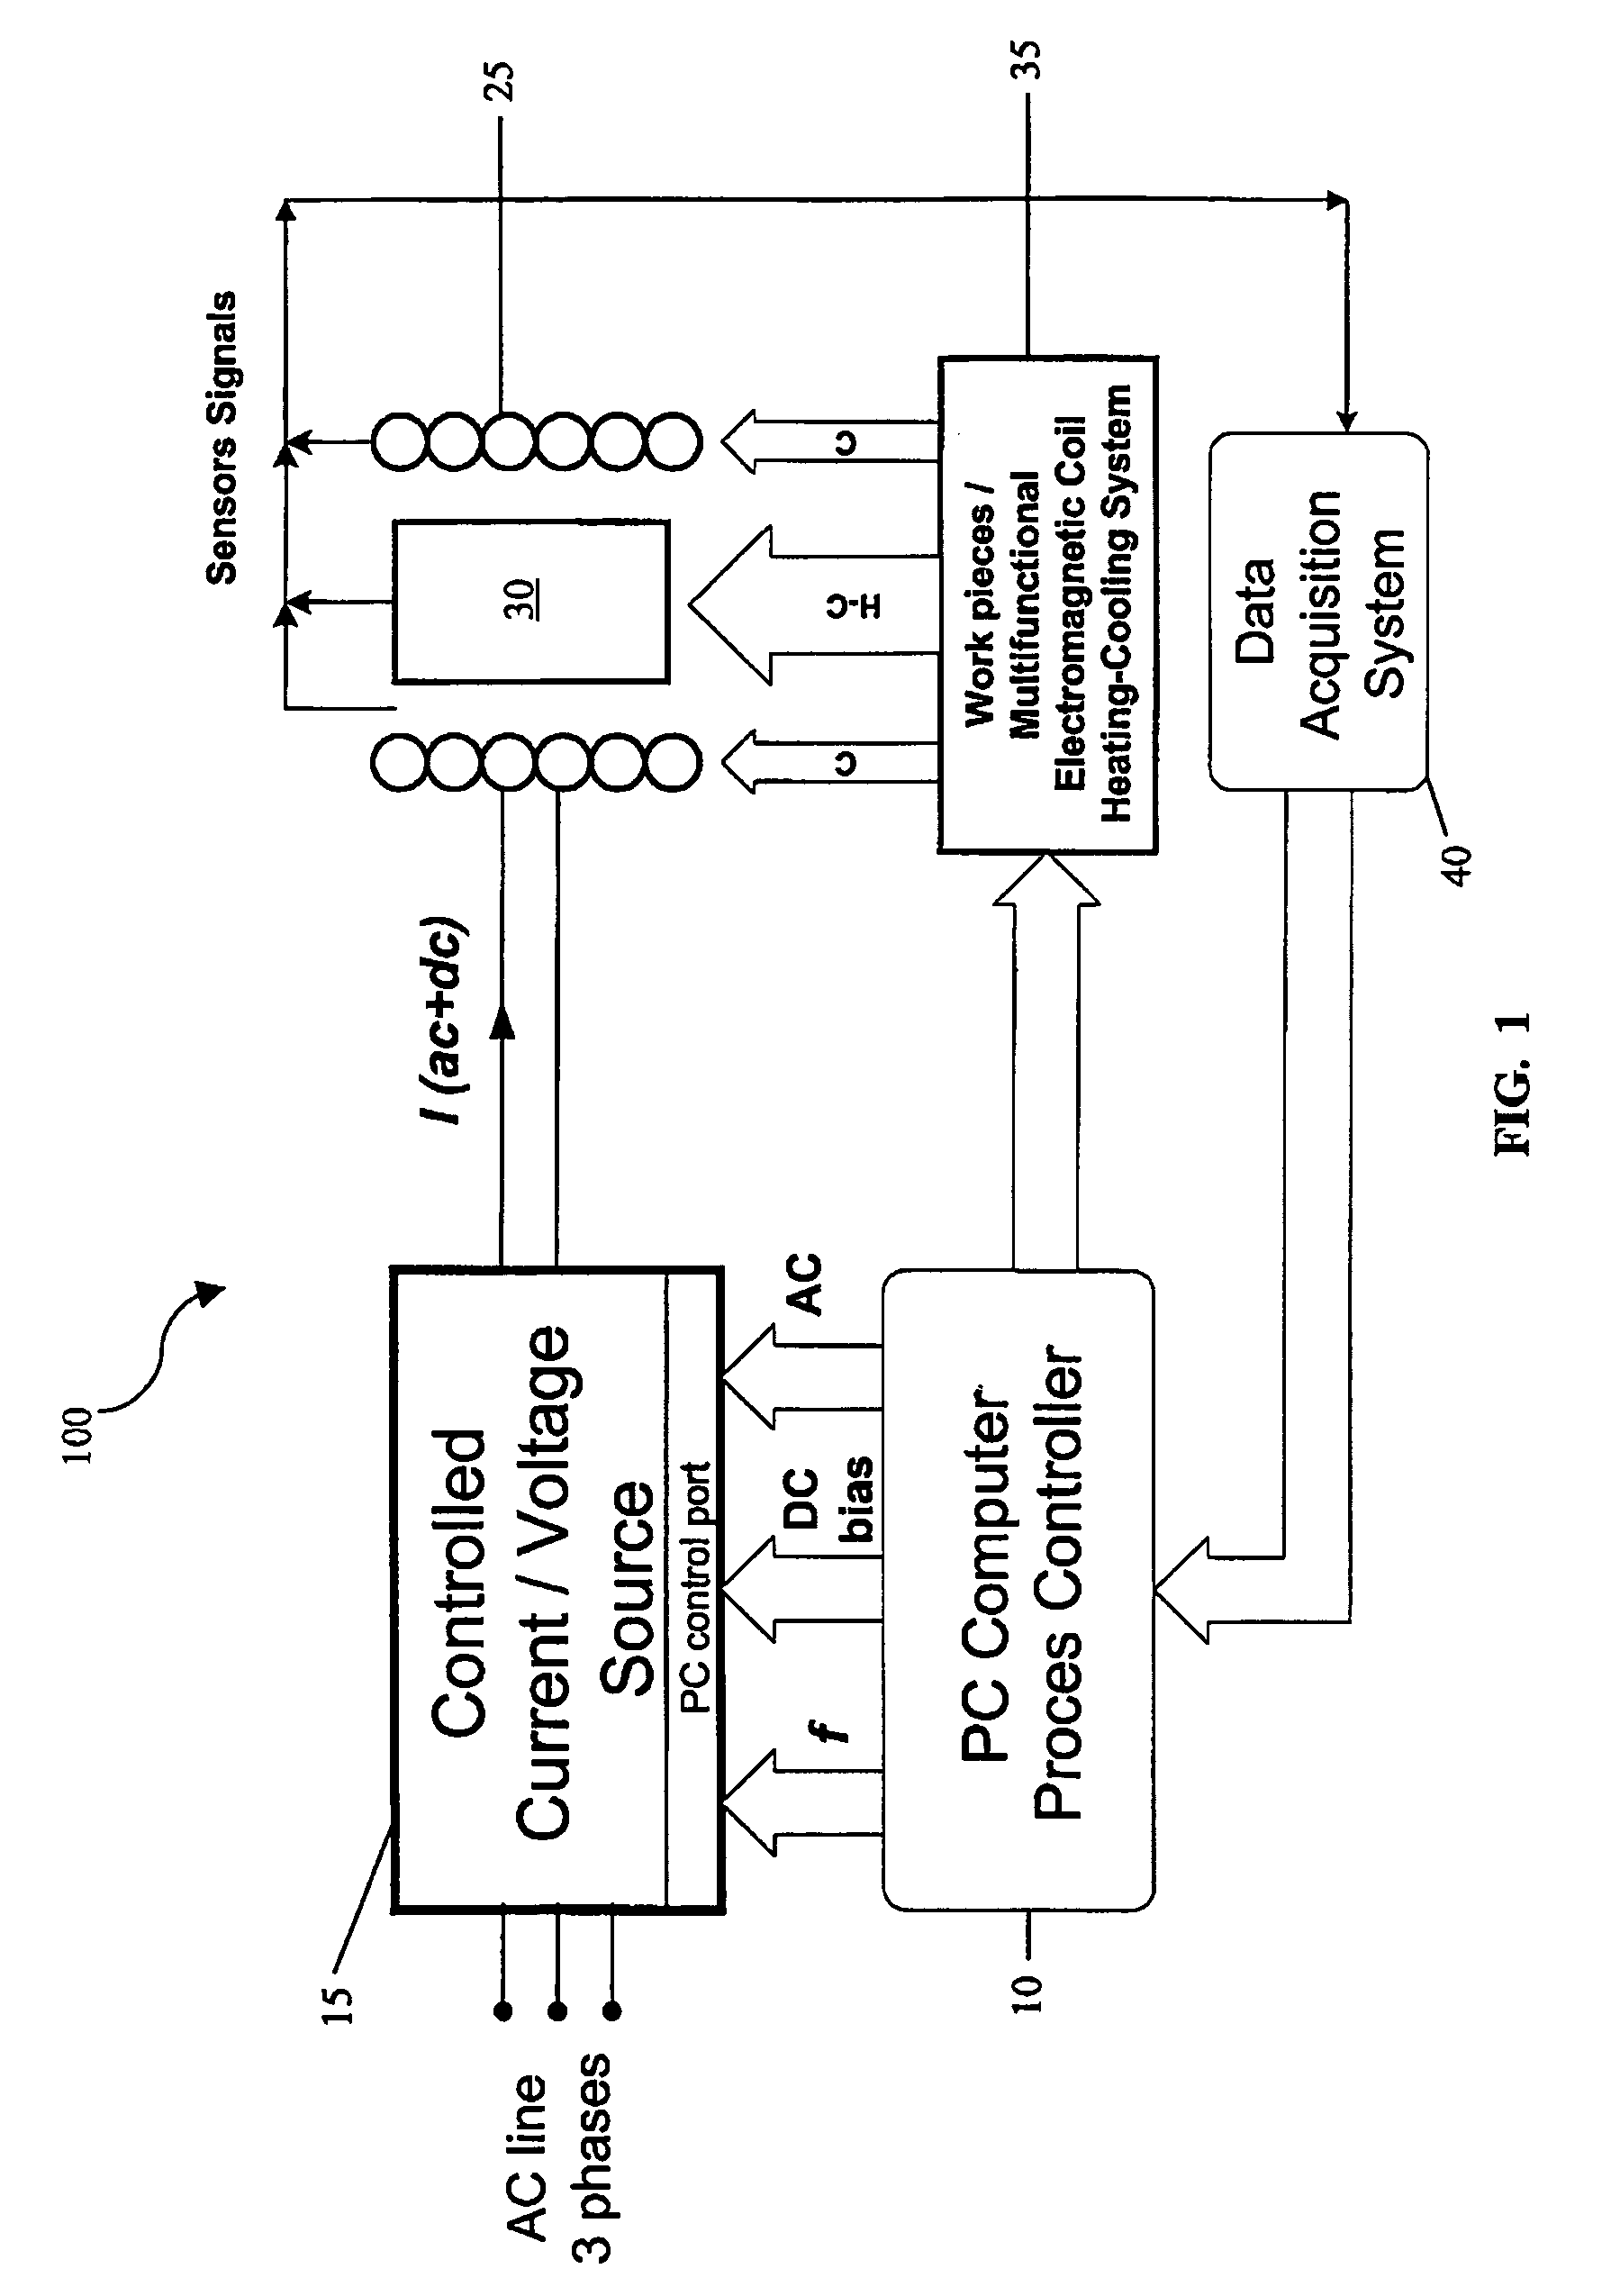 Electromagnetic method and apparatus for treatment of engineering materials, products, and related processes